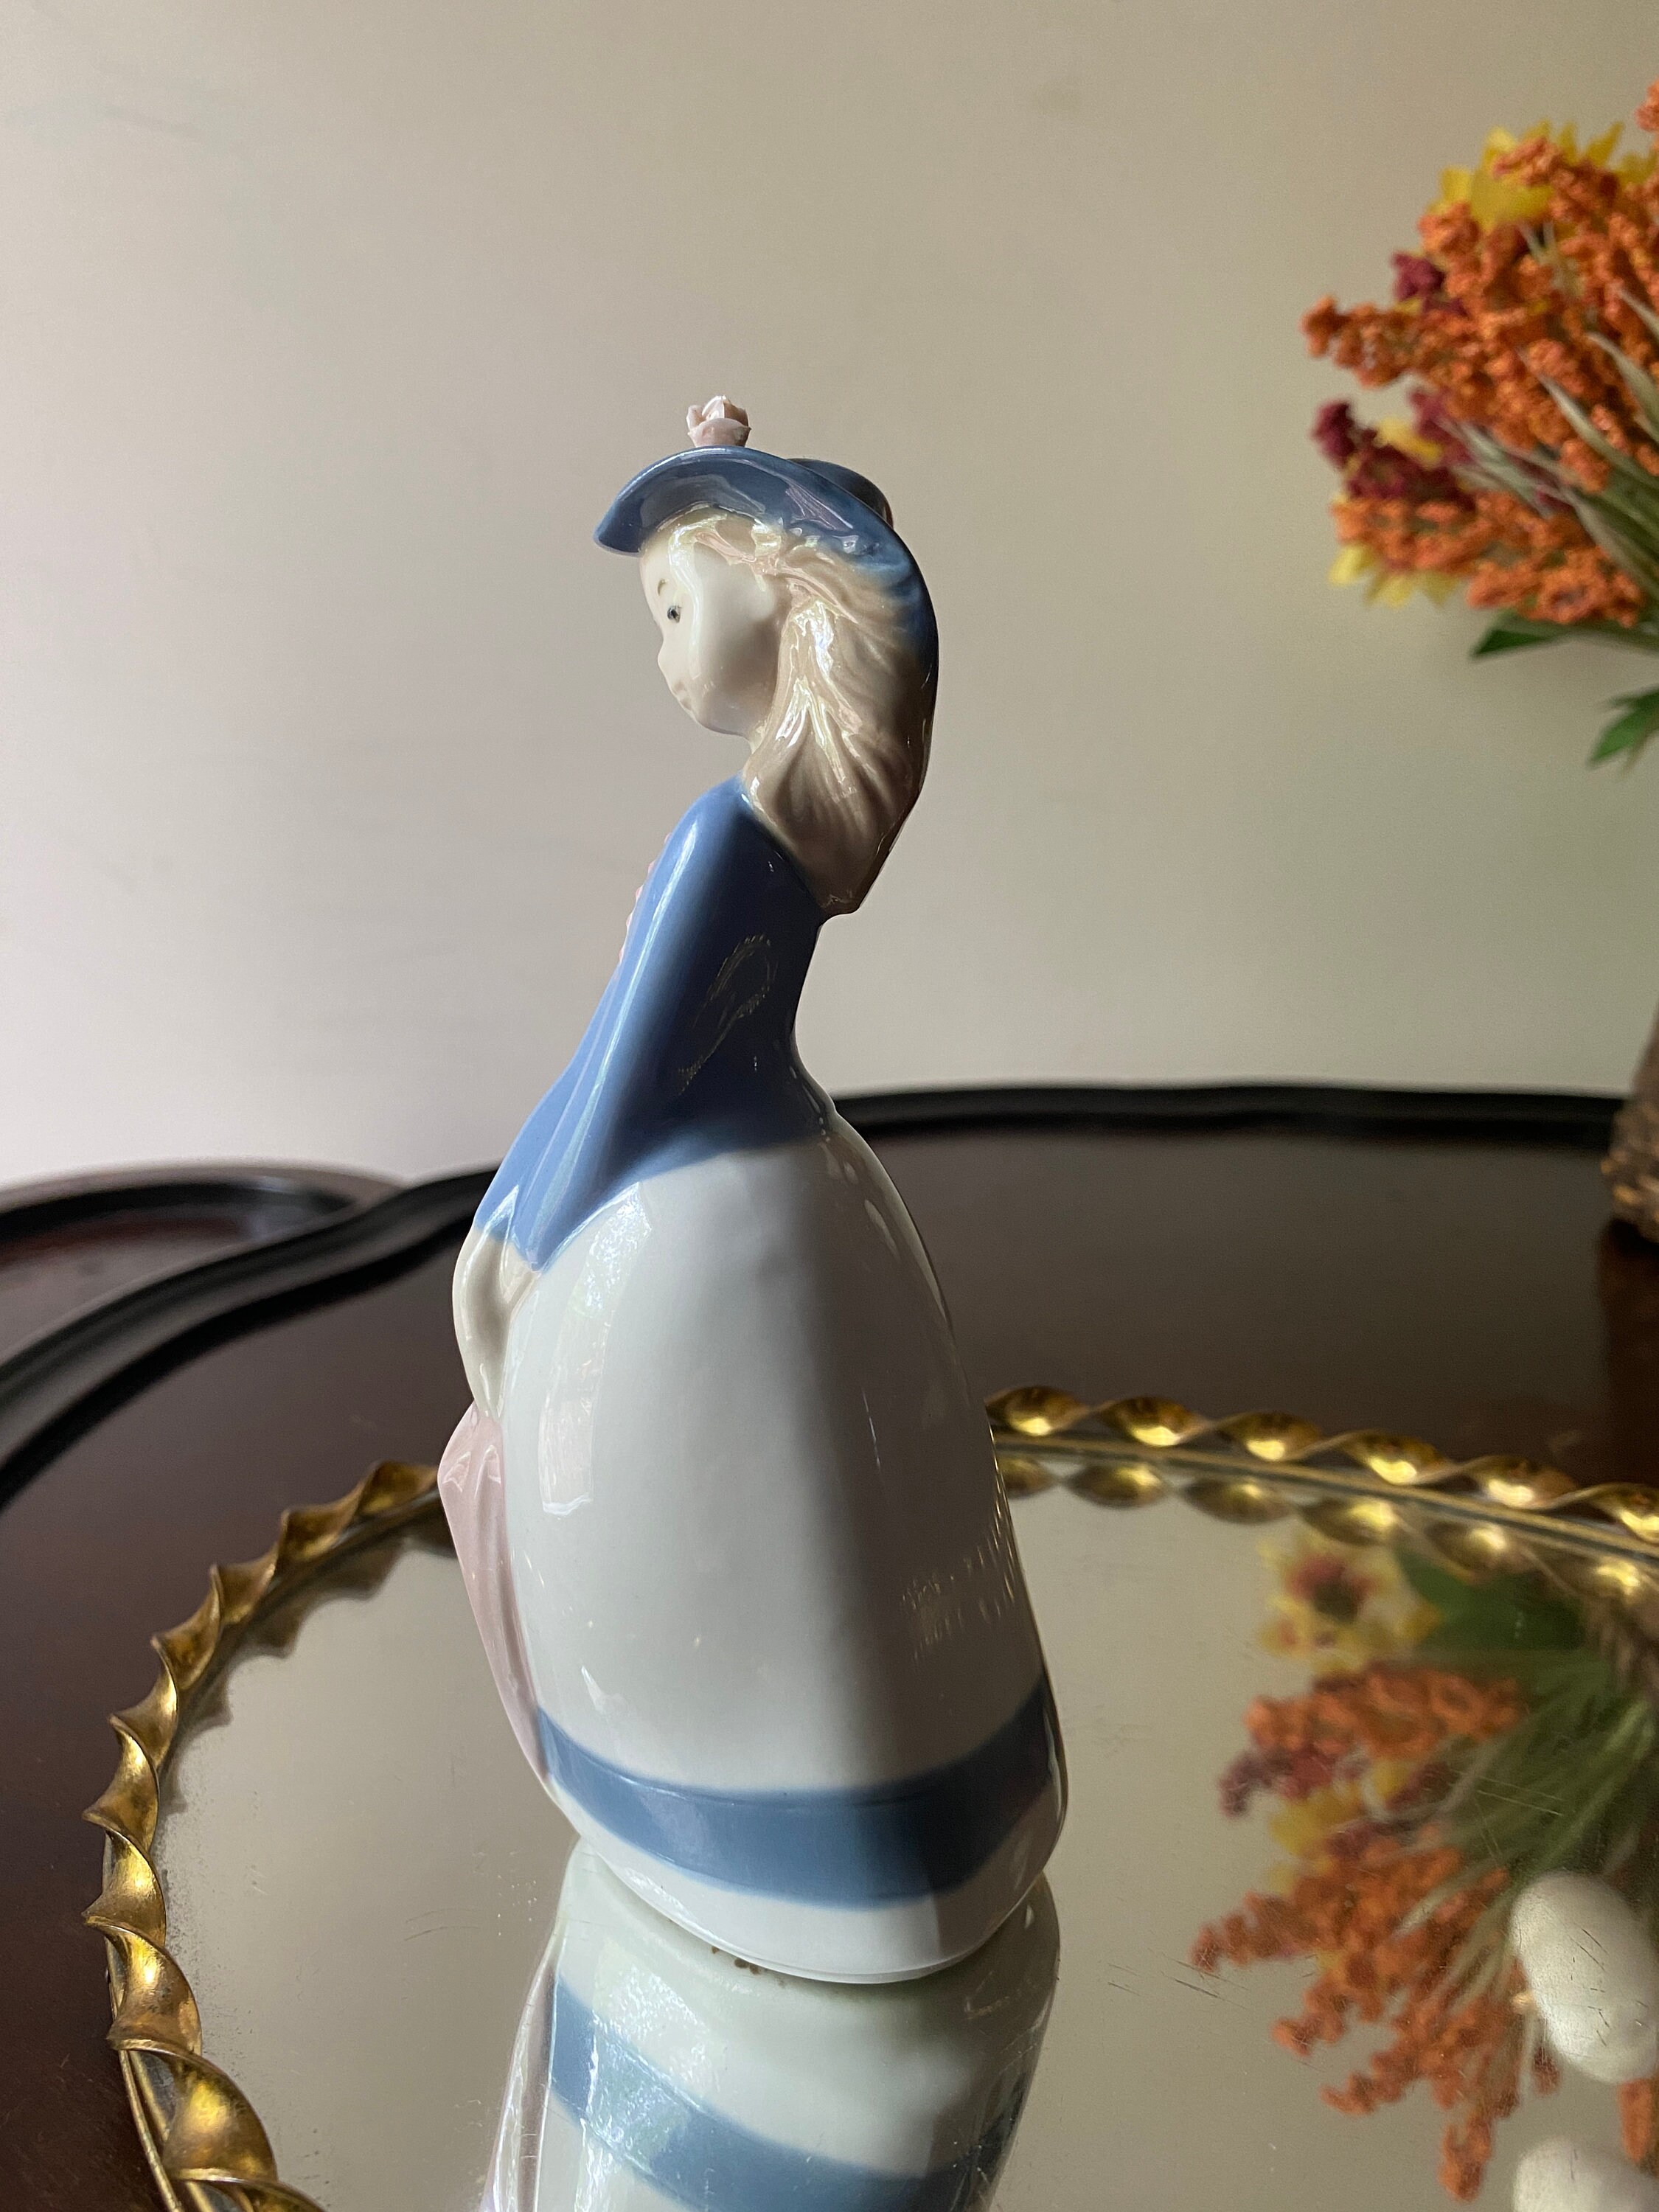 Porcelain Figurine Brands - Our Top 10 - Around The Block